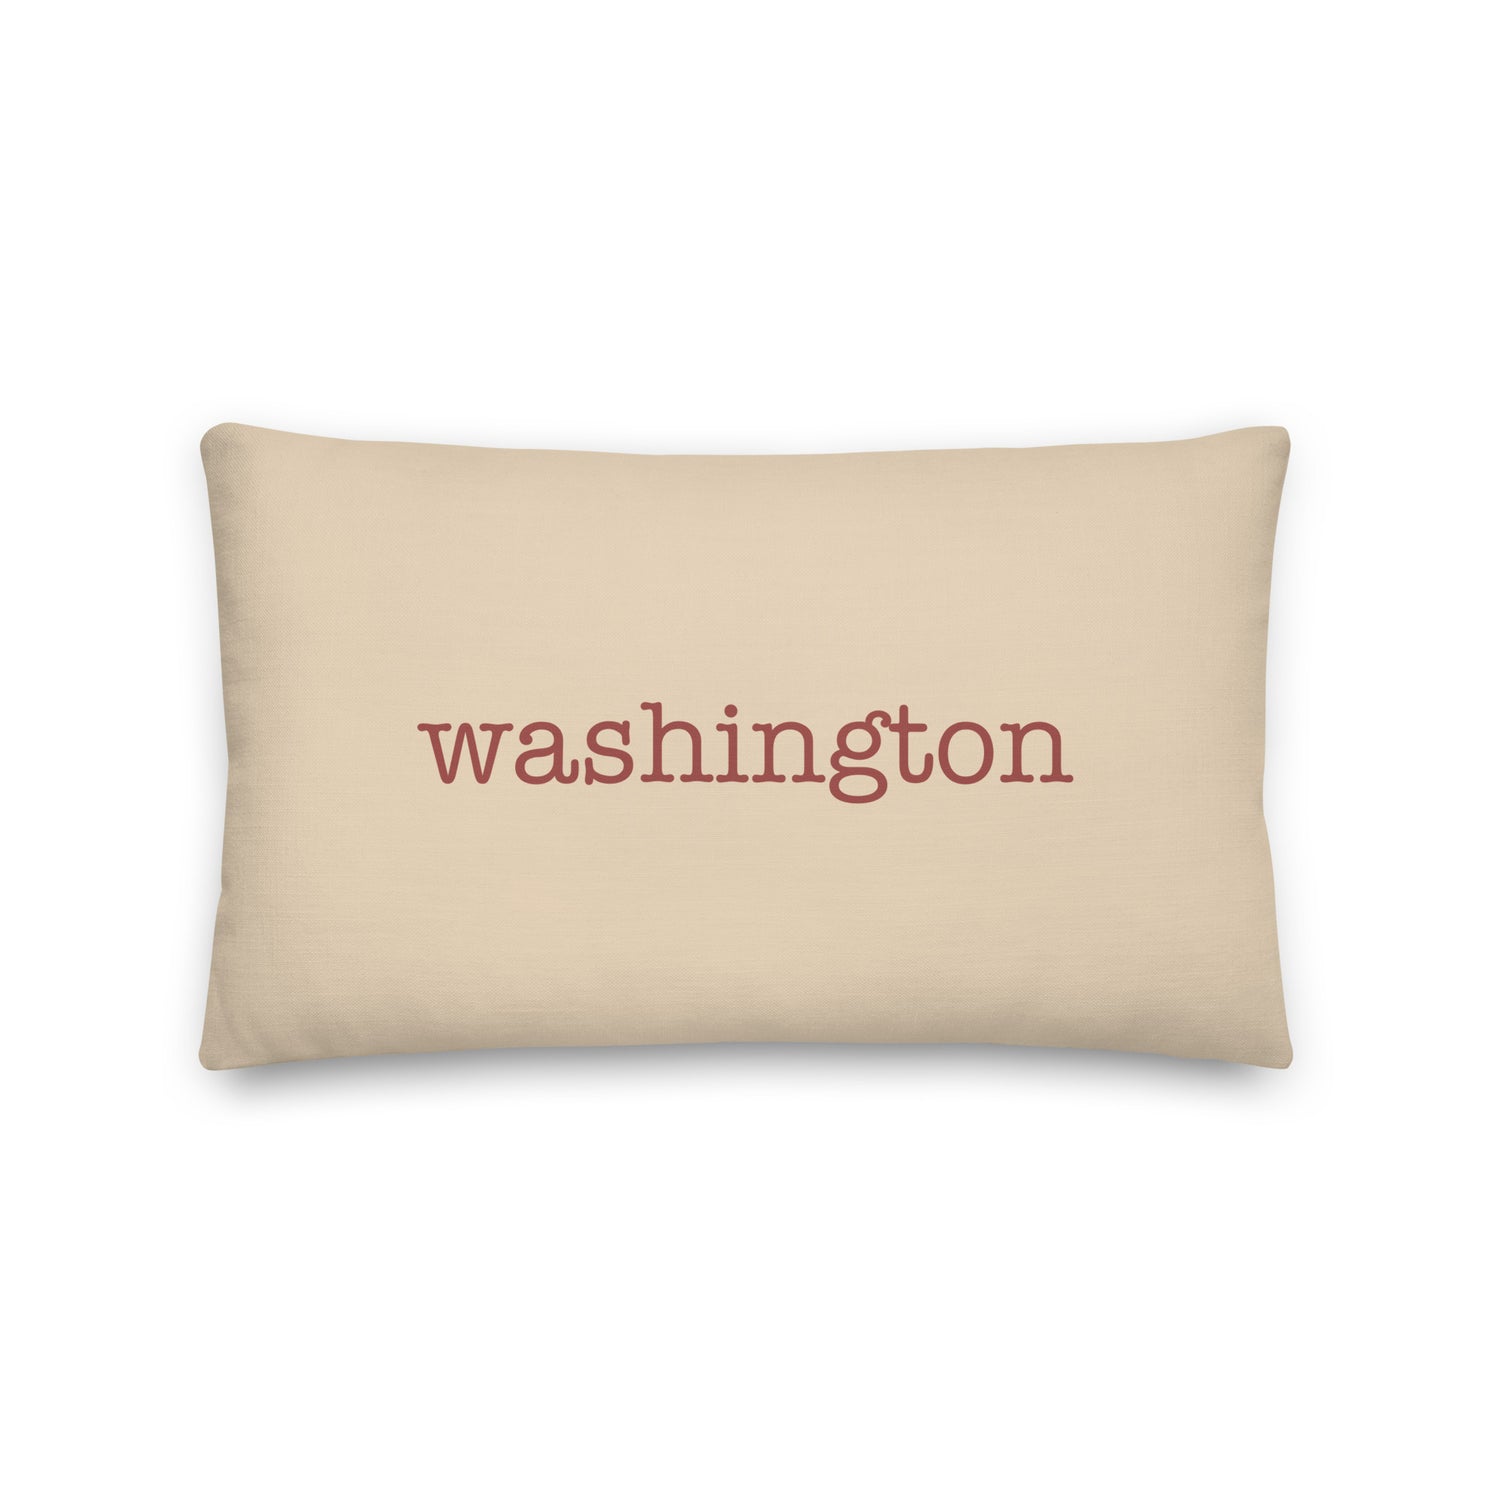 Washington D.C. Pillows and Blankets • DCA Airport Code